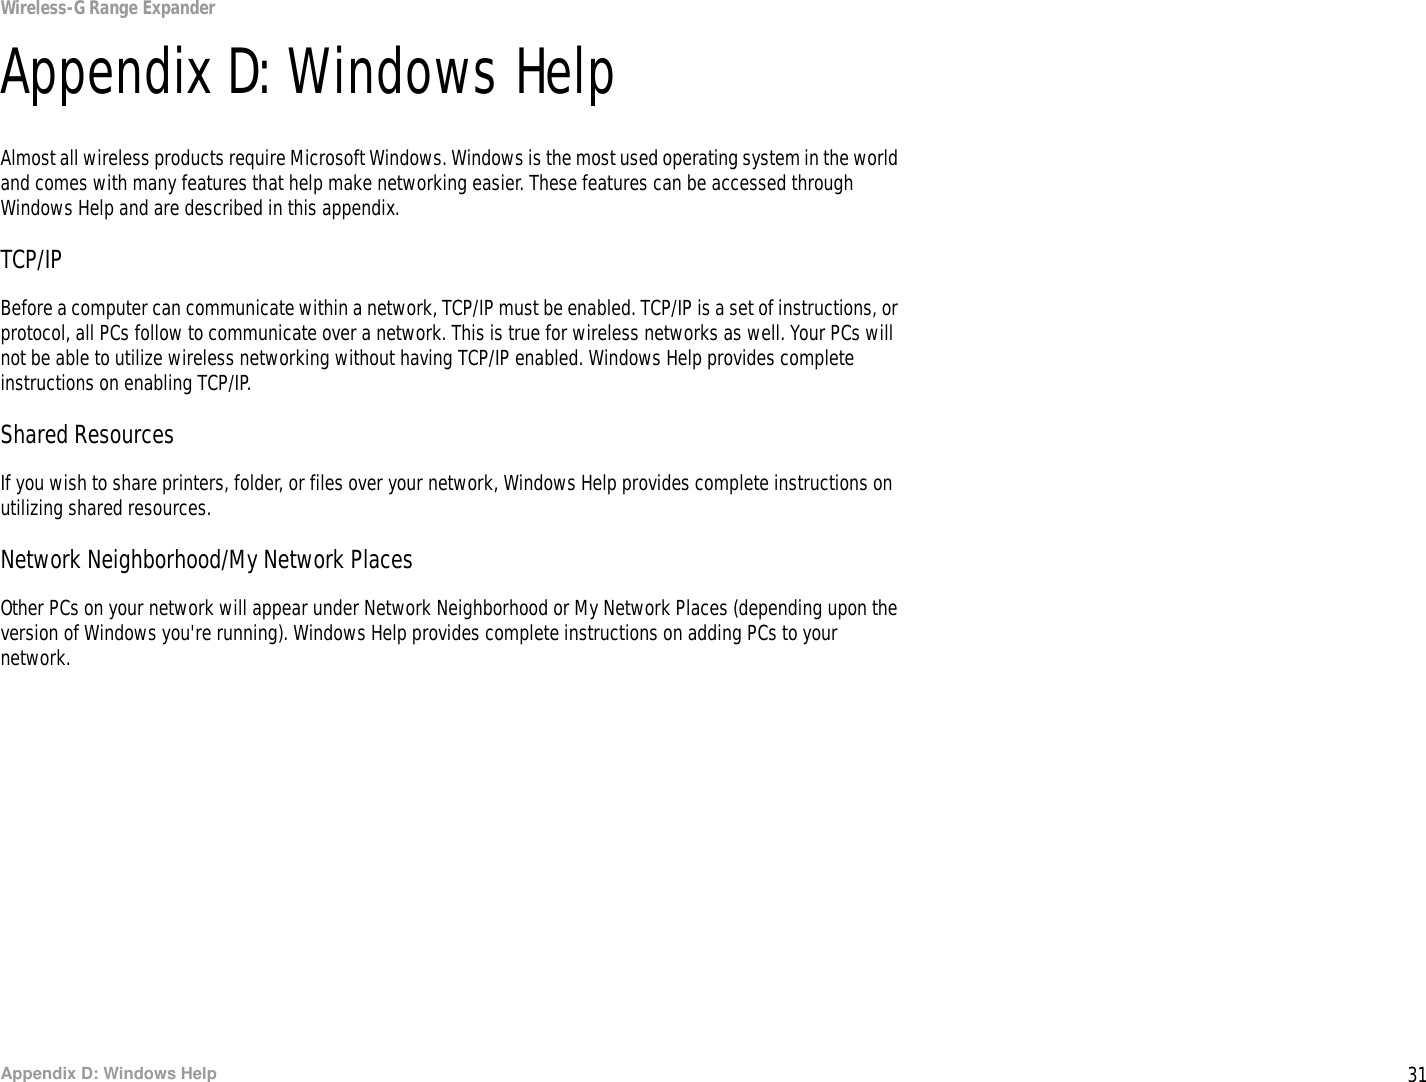 31Appendix D: Windows HelpWireless-G Range ExpanderAppendix D: Windows HelpAlmost all wireless products require Microsoft Windows. Windows is the most used operating system in the world and comes with many features that help make networking easier. These features can be accessed through Windows Help and are described in this appendix.TCP/IPBefore a computer can communicate within a network, TCP/IP must be enabled. TCP/IP is a set of instructions, or protocol, all PCs follow to communicate over a network. This is true for wireless networks as well. Your PCs will not be able to utilize wireless networking without having TCP/IP enabled. Windows Help provides complete instructions on enabling TCP/IP.Shared ResourcesIf you wish to share printers, folder, or files over your network, Windows Help provides complete instructions on utilizing shared resources.Network Neighborhood/My Network PlacesOther PCs on your network will appear under Network Neighborhood or My Network Places (depending upon the version of Windows you&apos;re running). Windows Help provides complete instructions on adding PCs to your network.